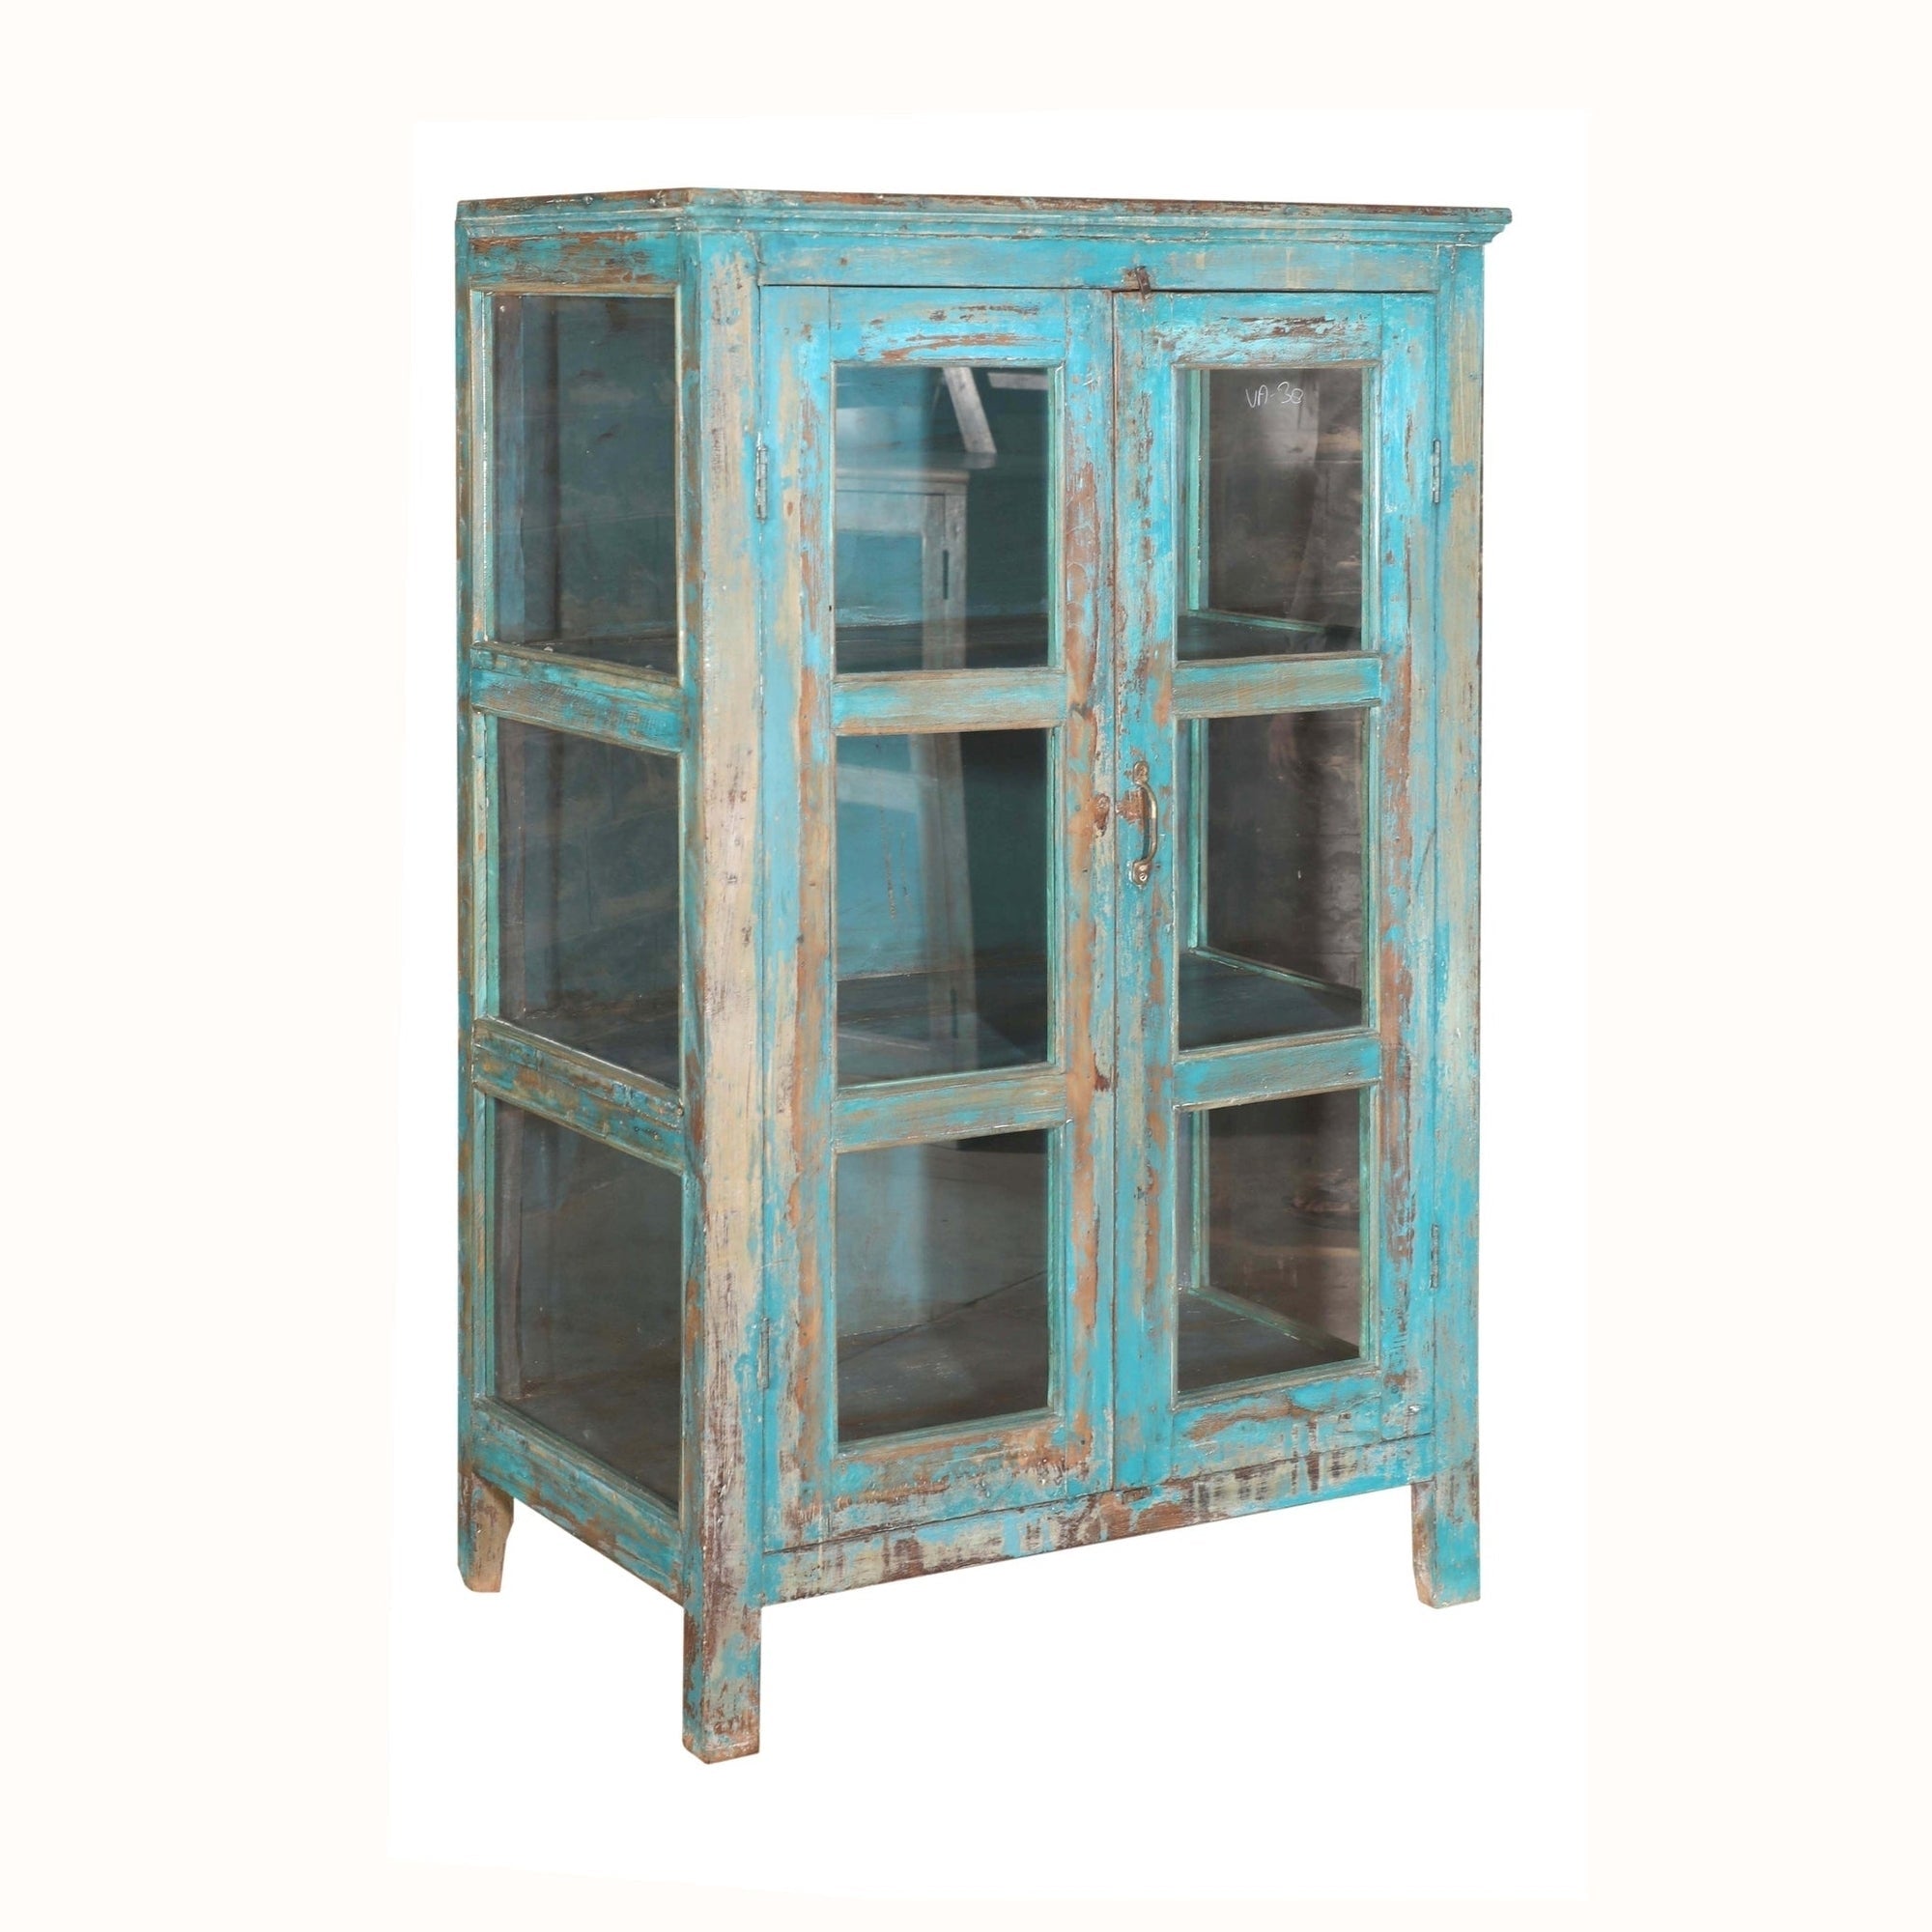 RM-060156, Wooden Cabinet With Glass, Teak, 50+Yrs Old - iDekor8